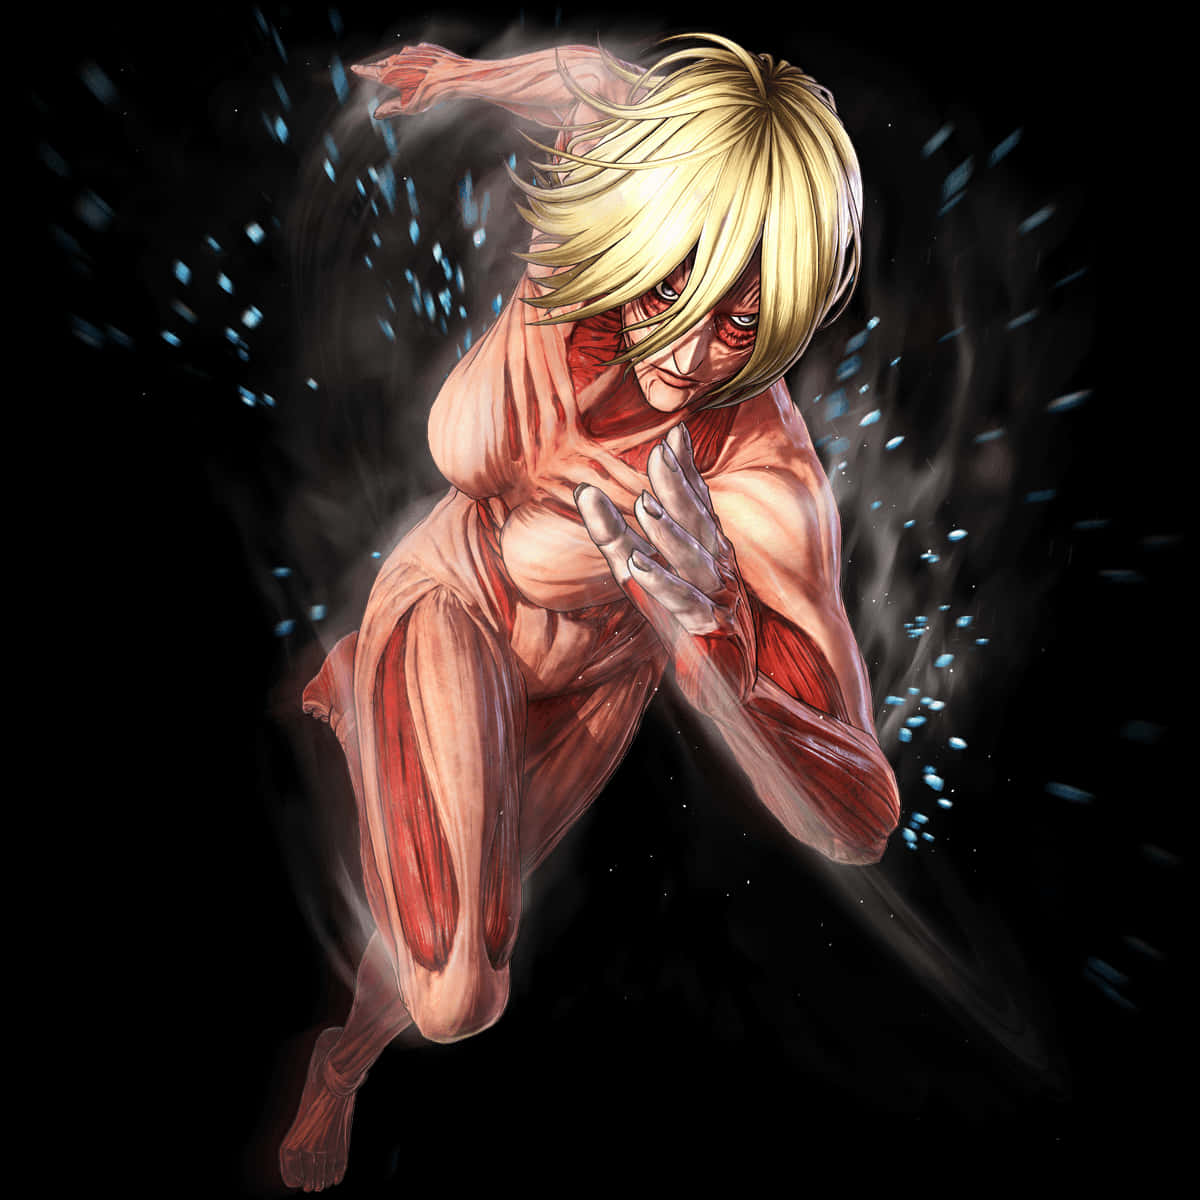 A Woman With Blonde Hair And Red Eyes Running